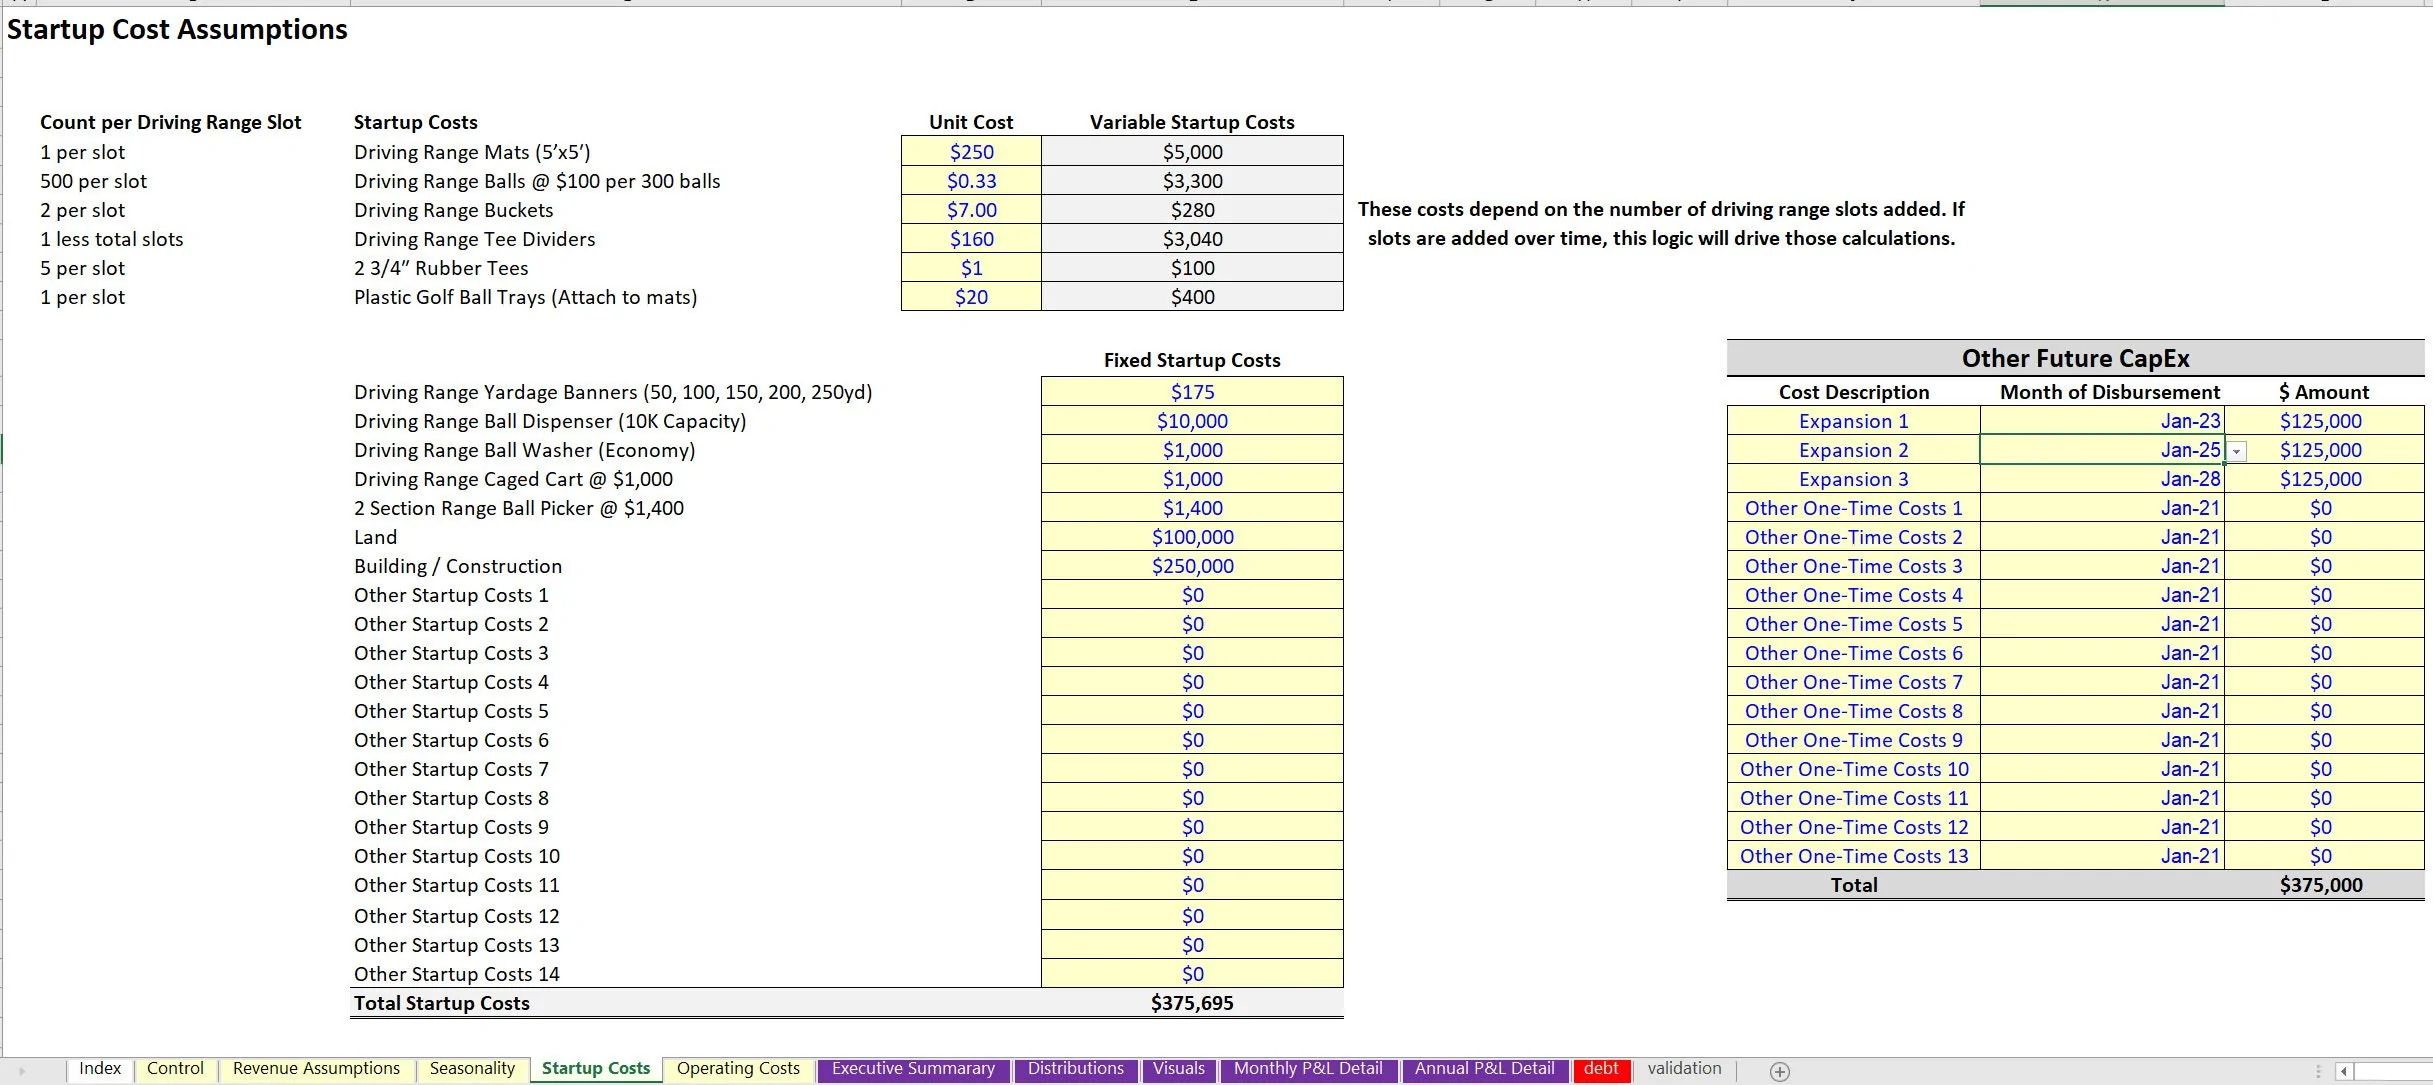 Driving Range: Startup Financial Model (Excel template (XLSX)) Preview Image